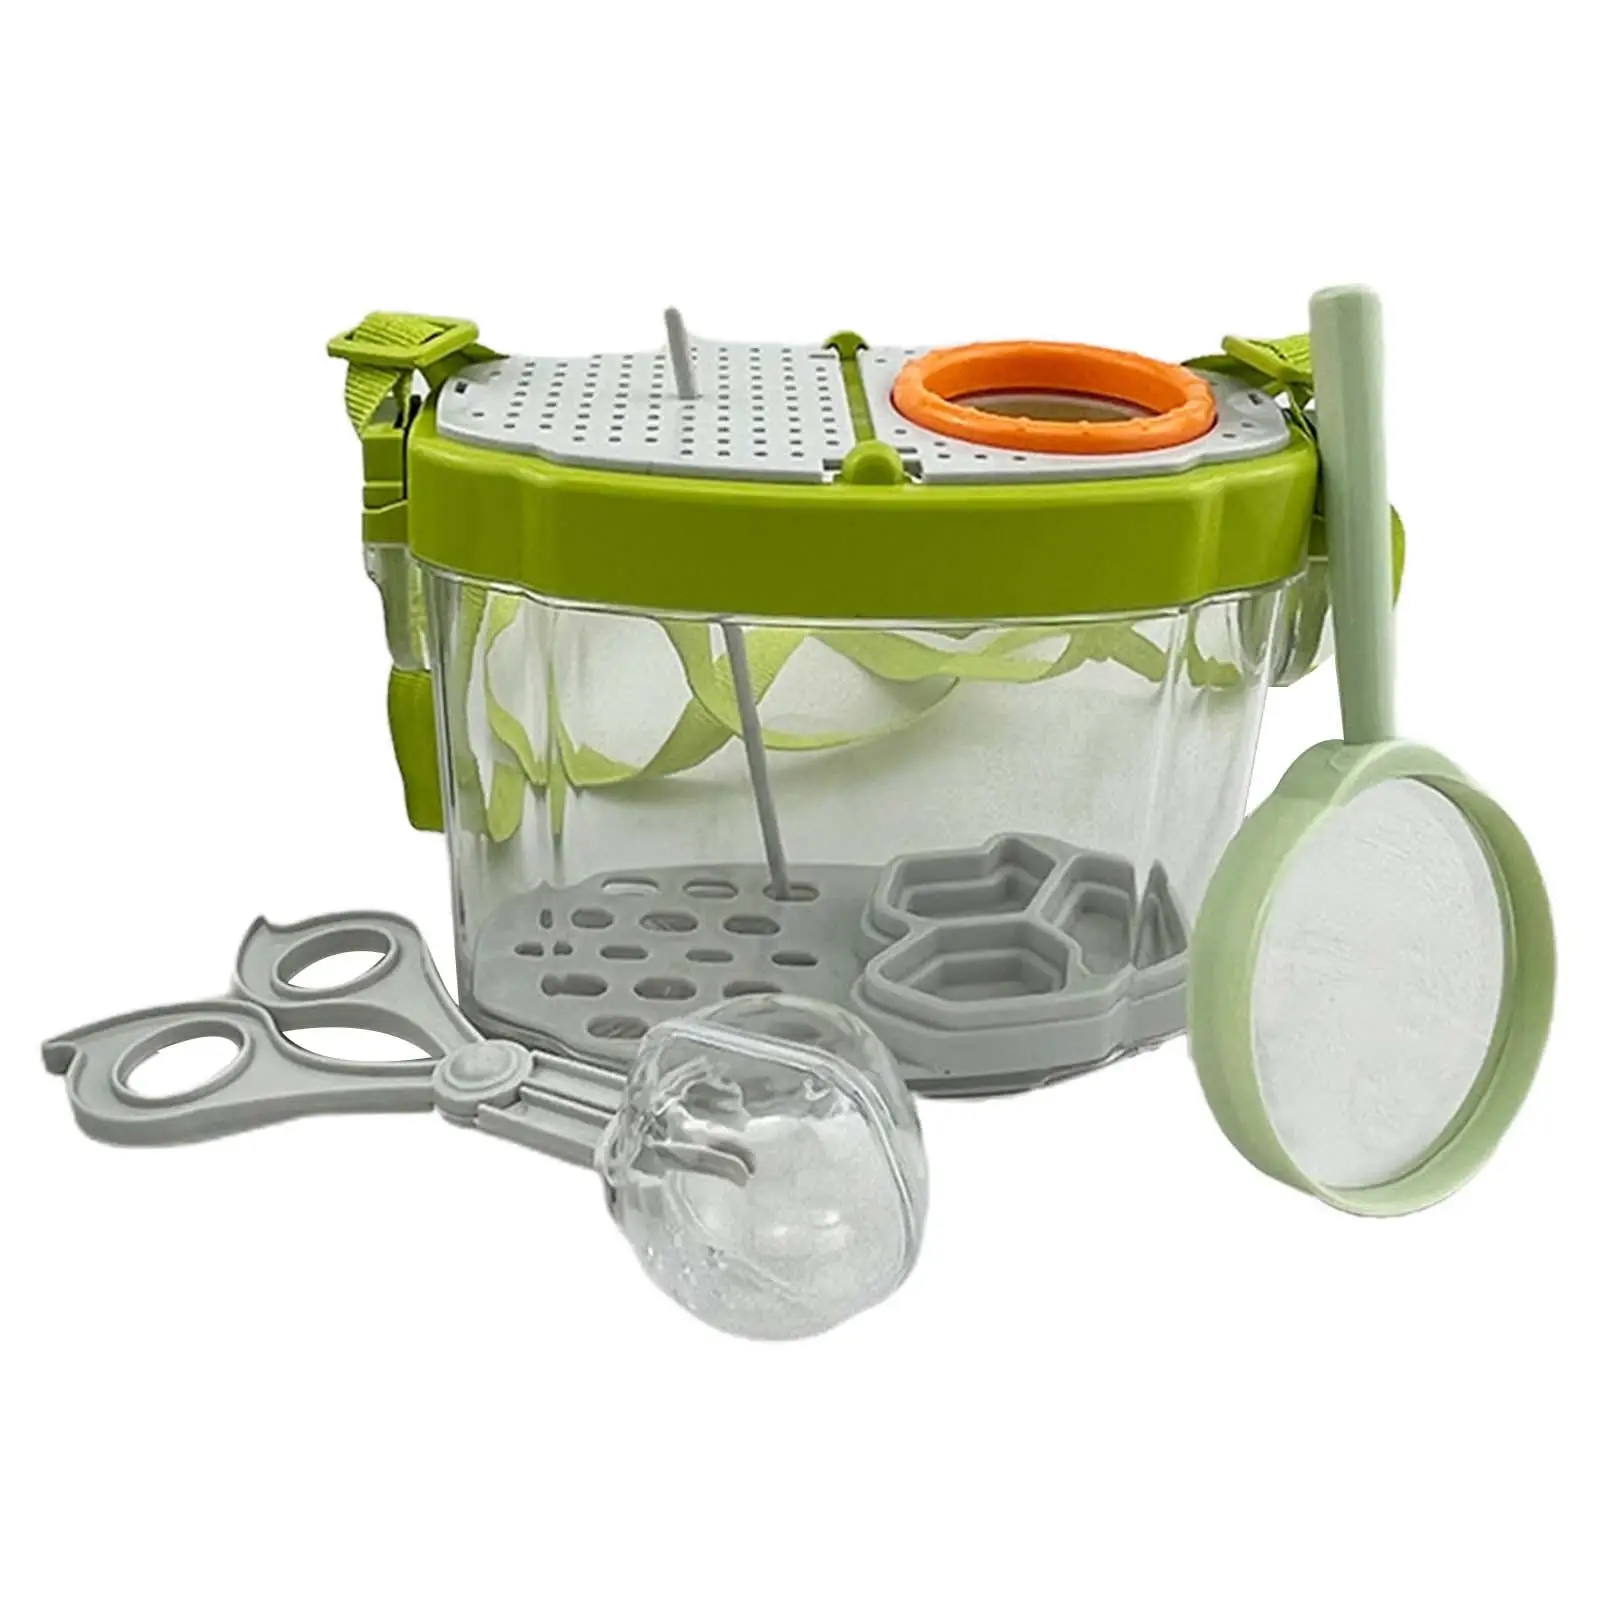 Bug Catcher Bug Observation Container Bug Viewer Box for Boys Girls Children